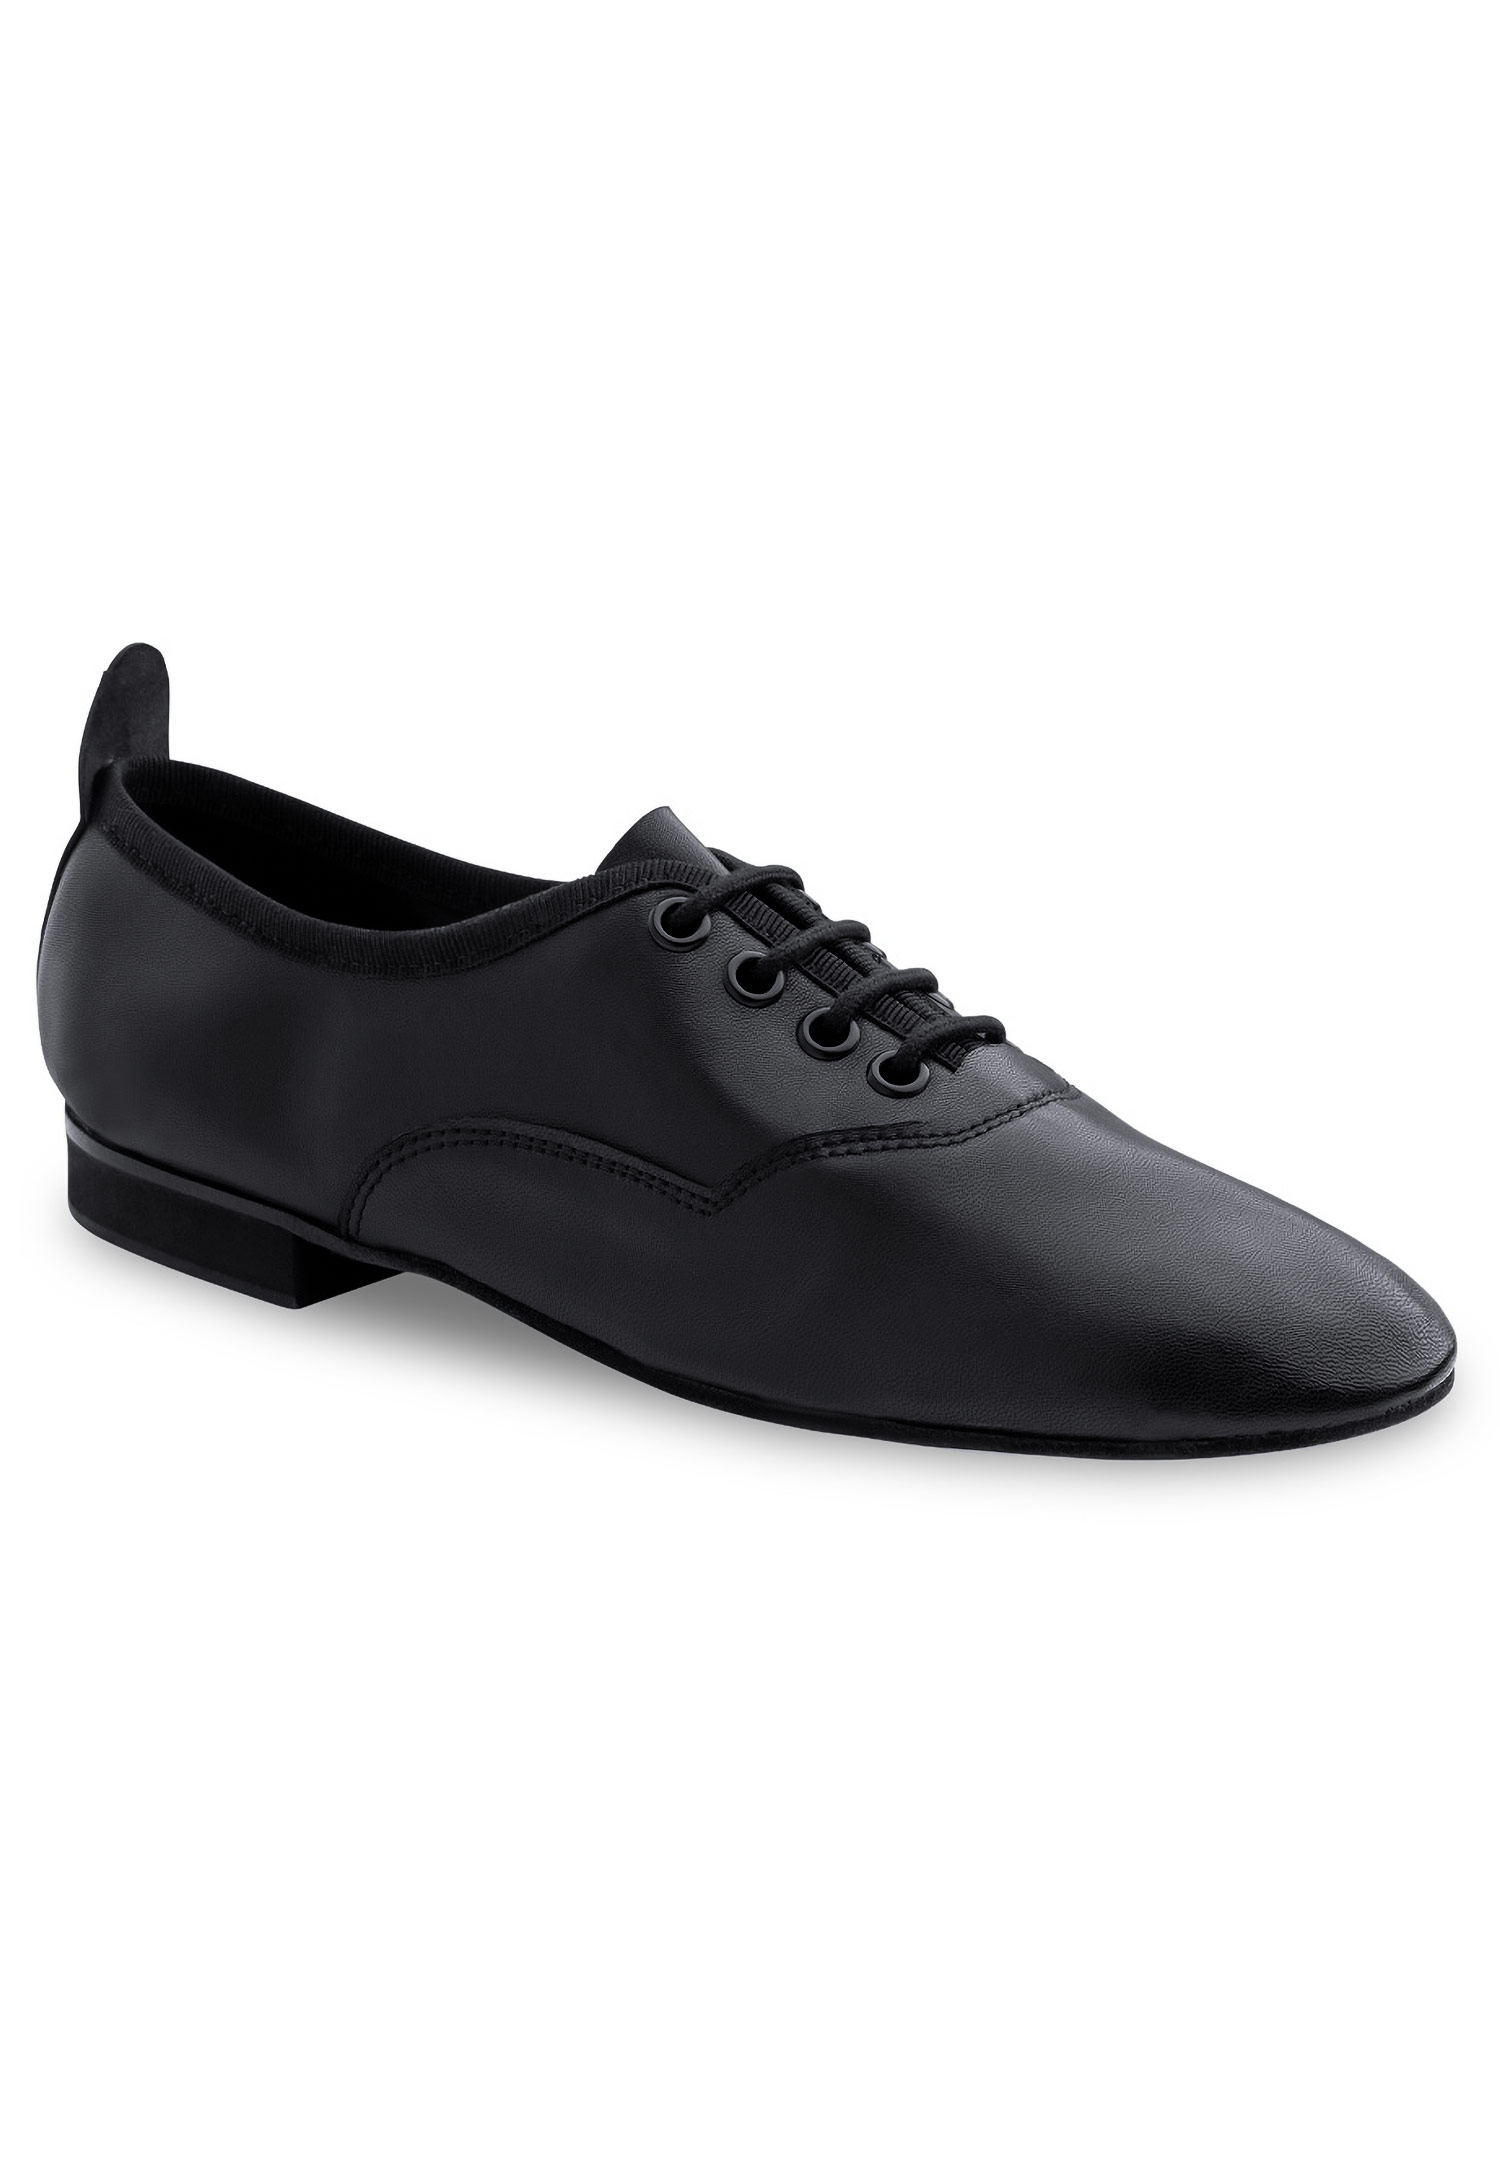 Practice Shoes for Women | Ballroom & Latin Dance Practice Shoes